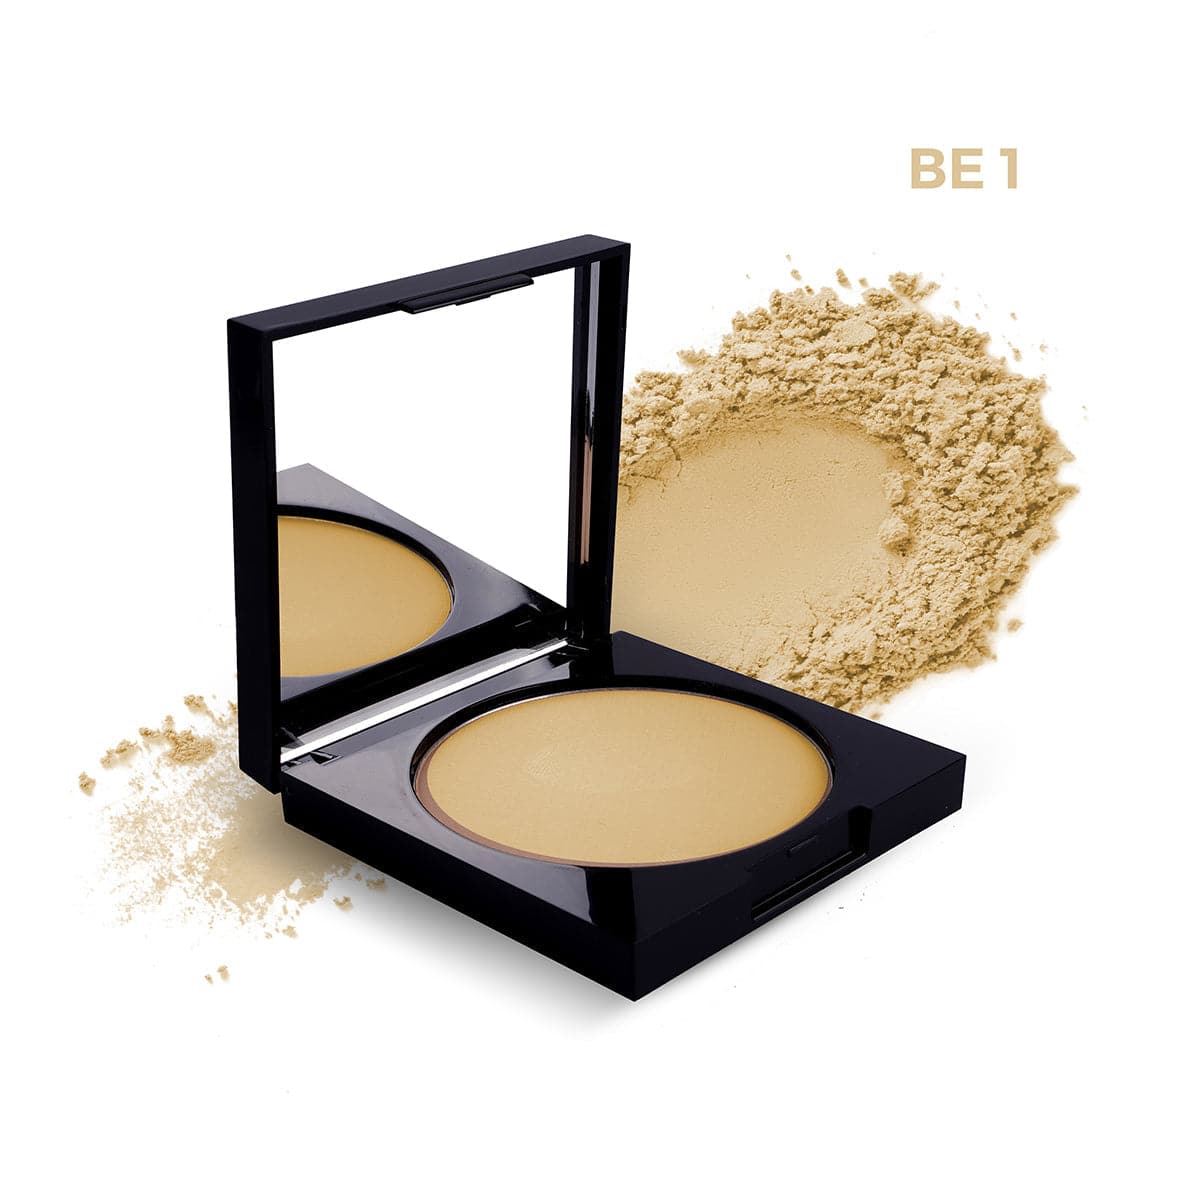 ST London Mineralz Compact Powder - Be 1 - Premium Health & Beauty from St London - Just Rs 2450.00! Shop now at Cozmetica